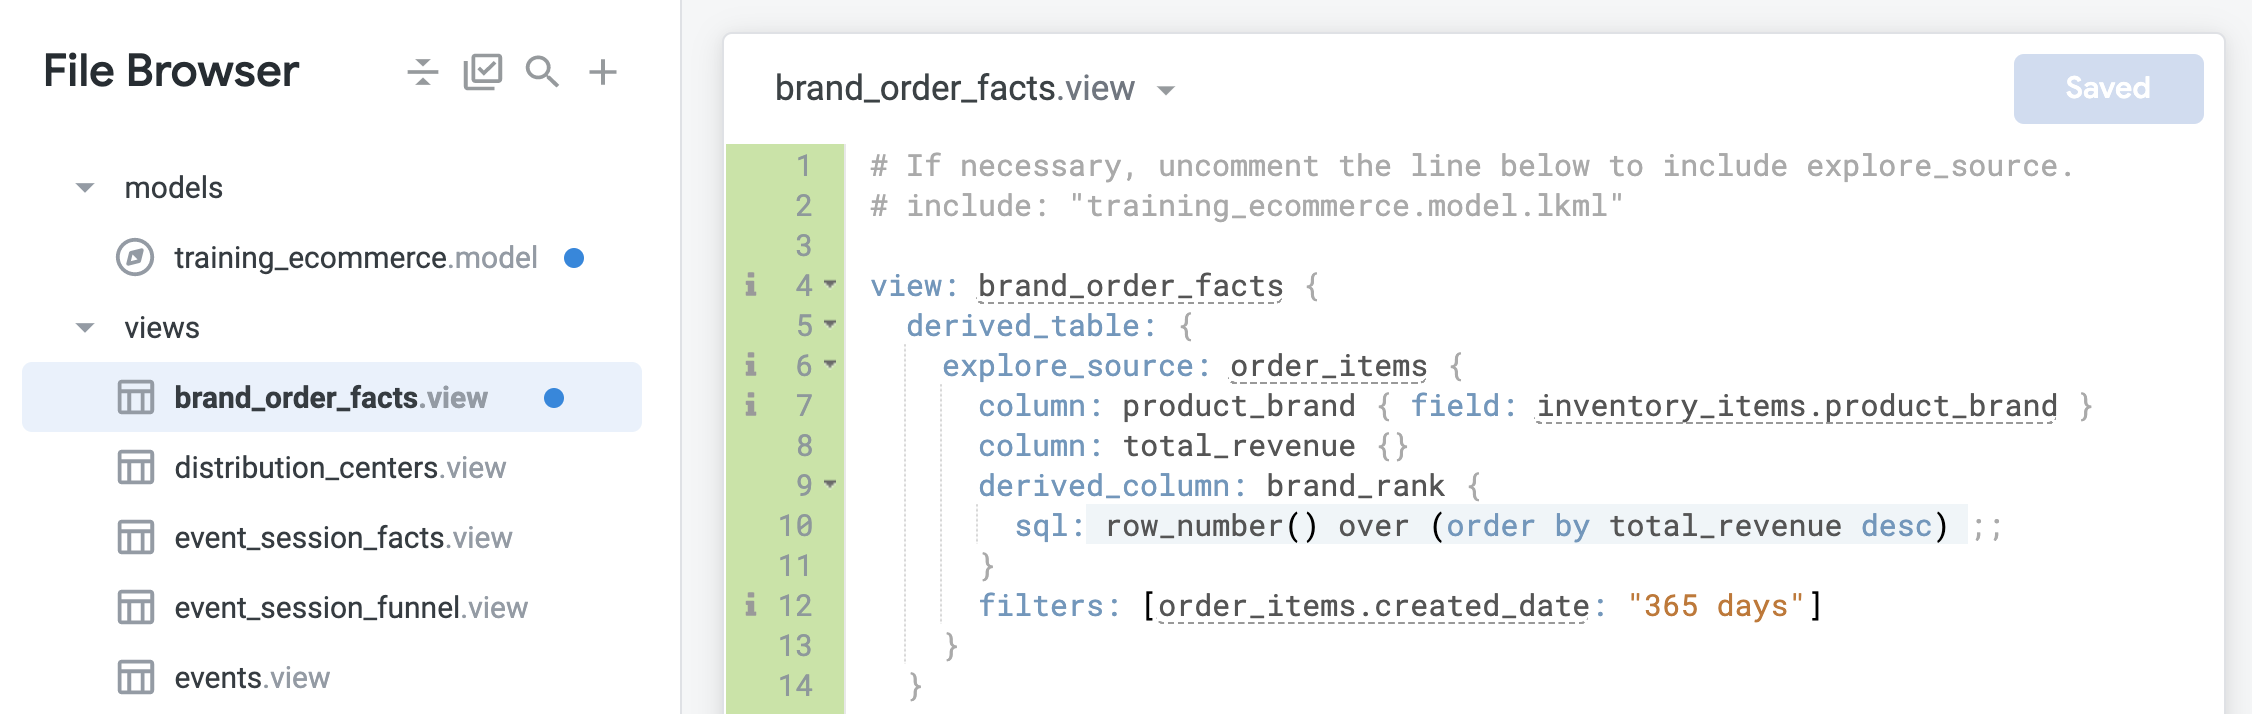 File browser page showing brand_order_facts.view code